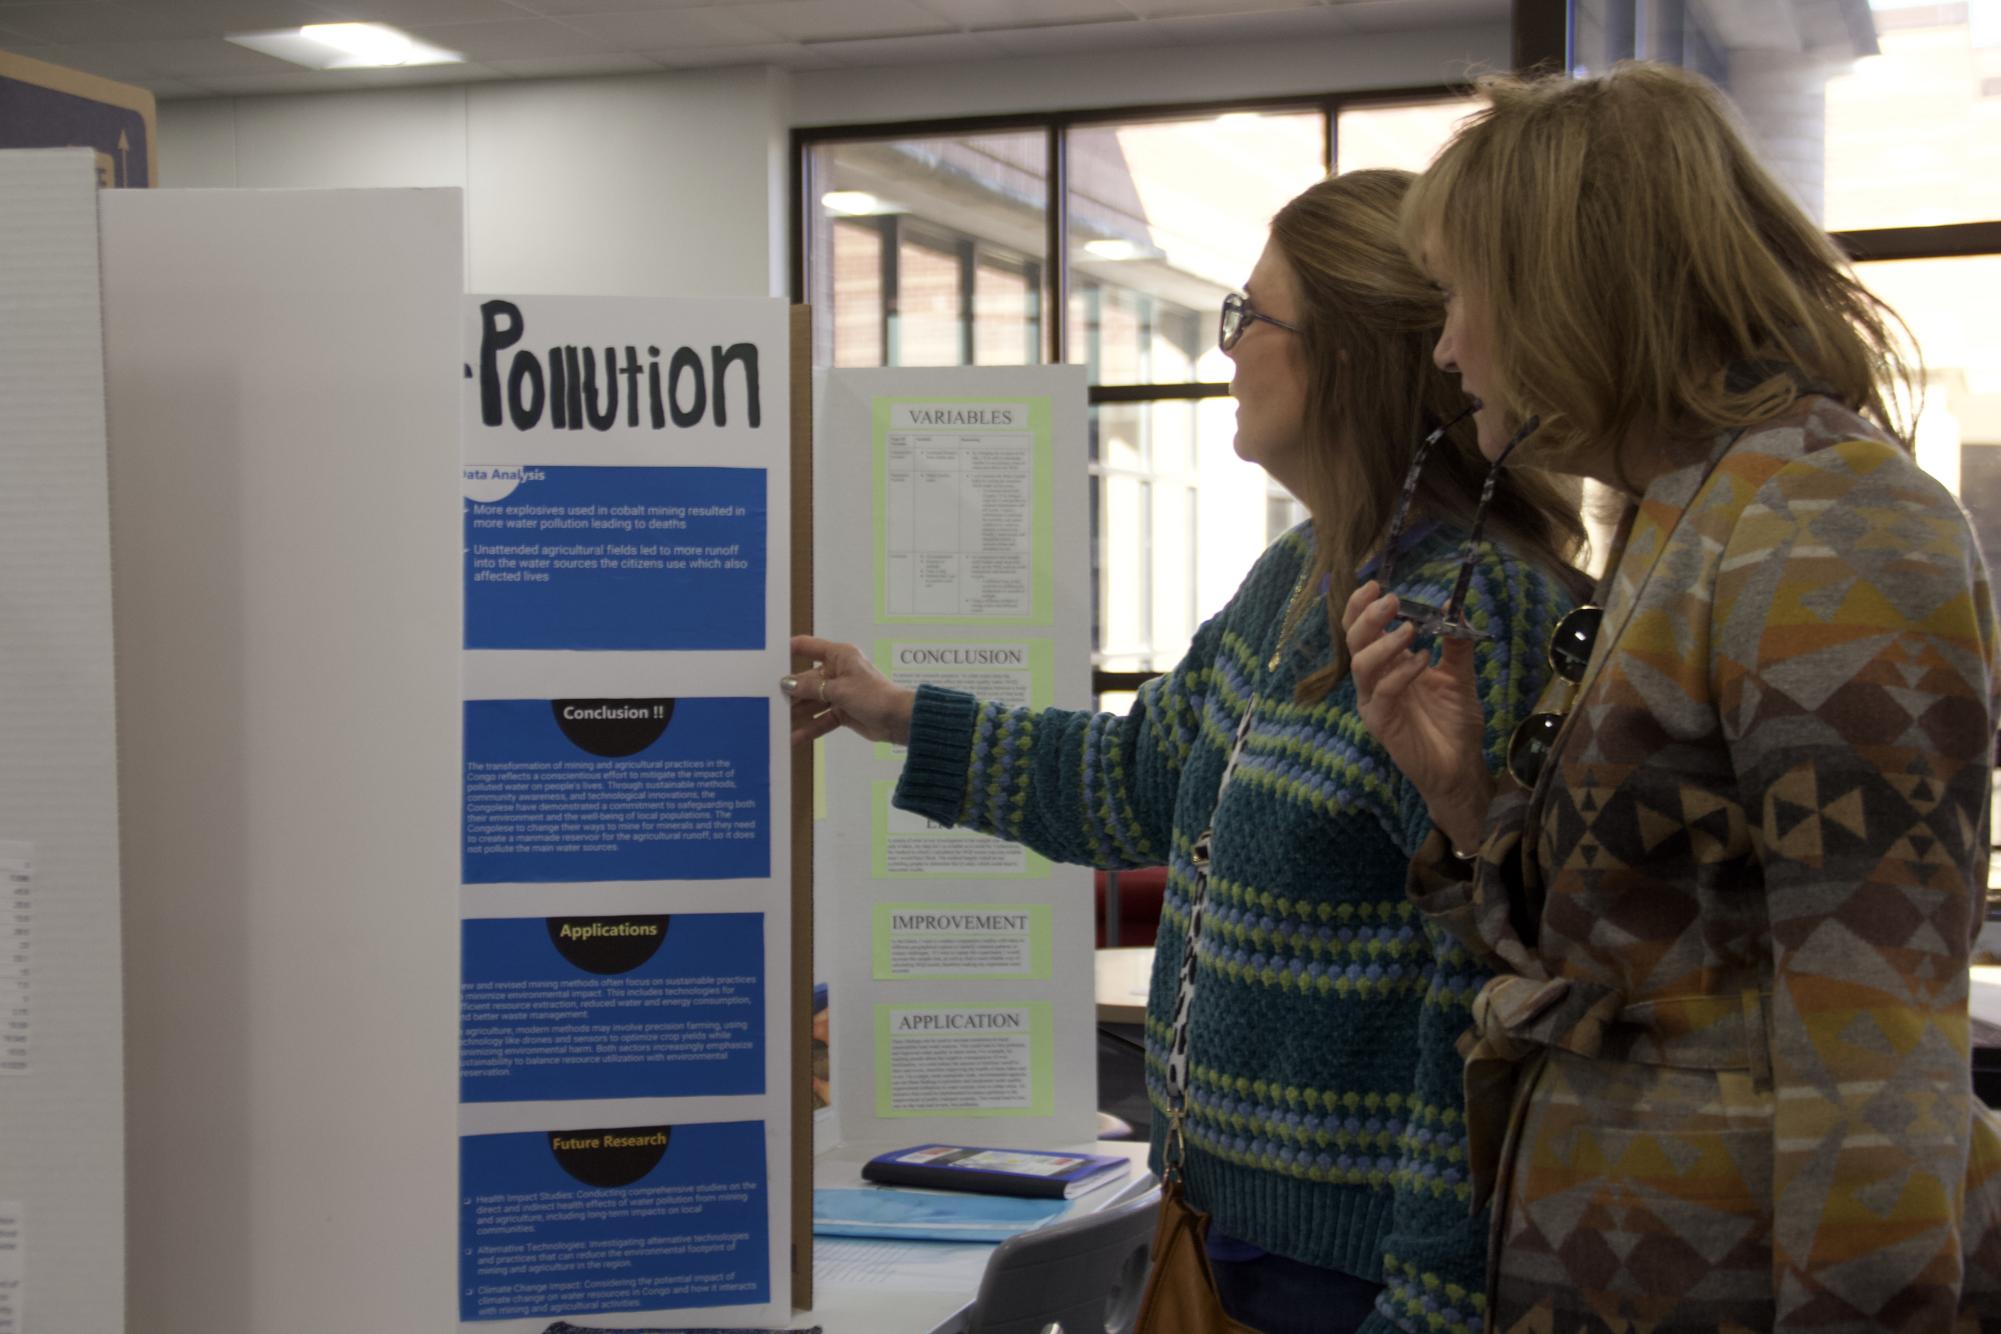 Former Coppell ISD second grade teacher Carla McCown and Former Lakeside Elementary School teacher Therese “Teri” Keith observe triboard ES6HA on water pollution. The Coppell High School Science Fair is an annual event and took place in the library on Jan. 18.
